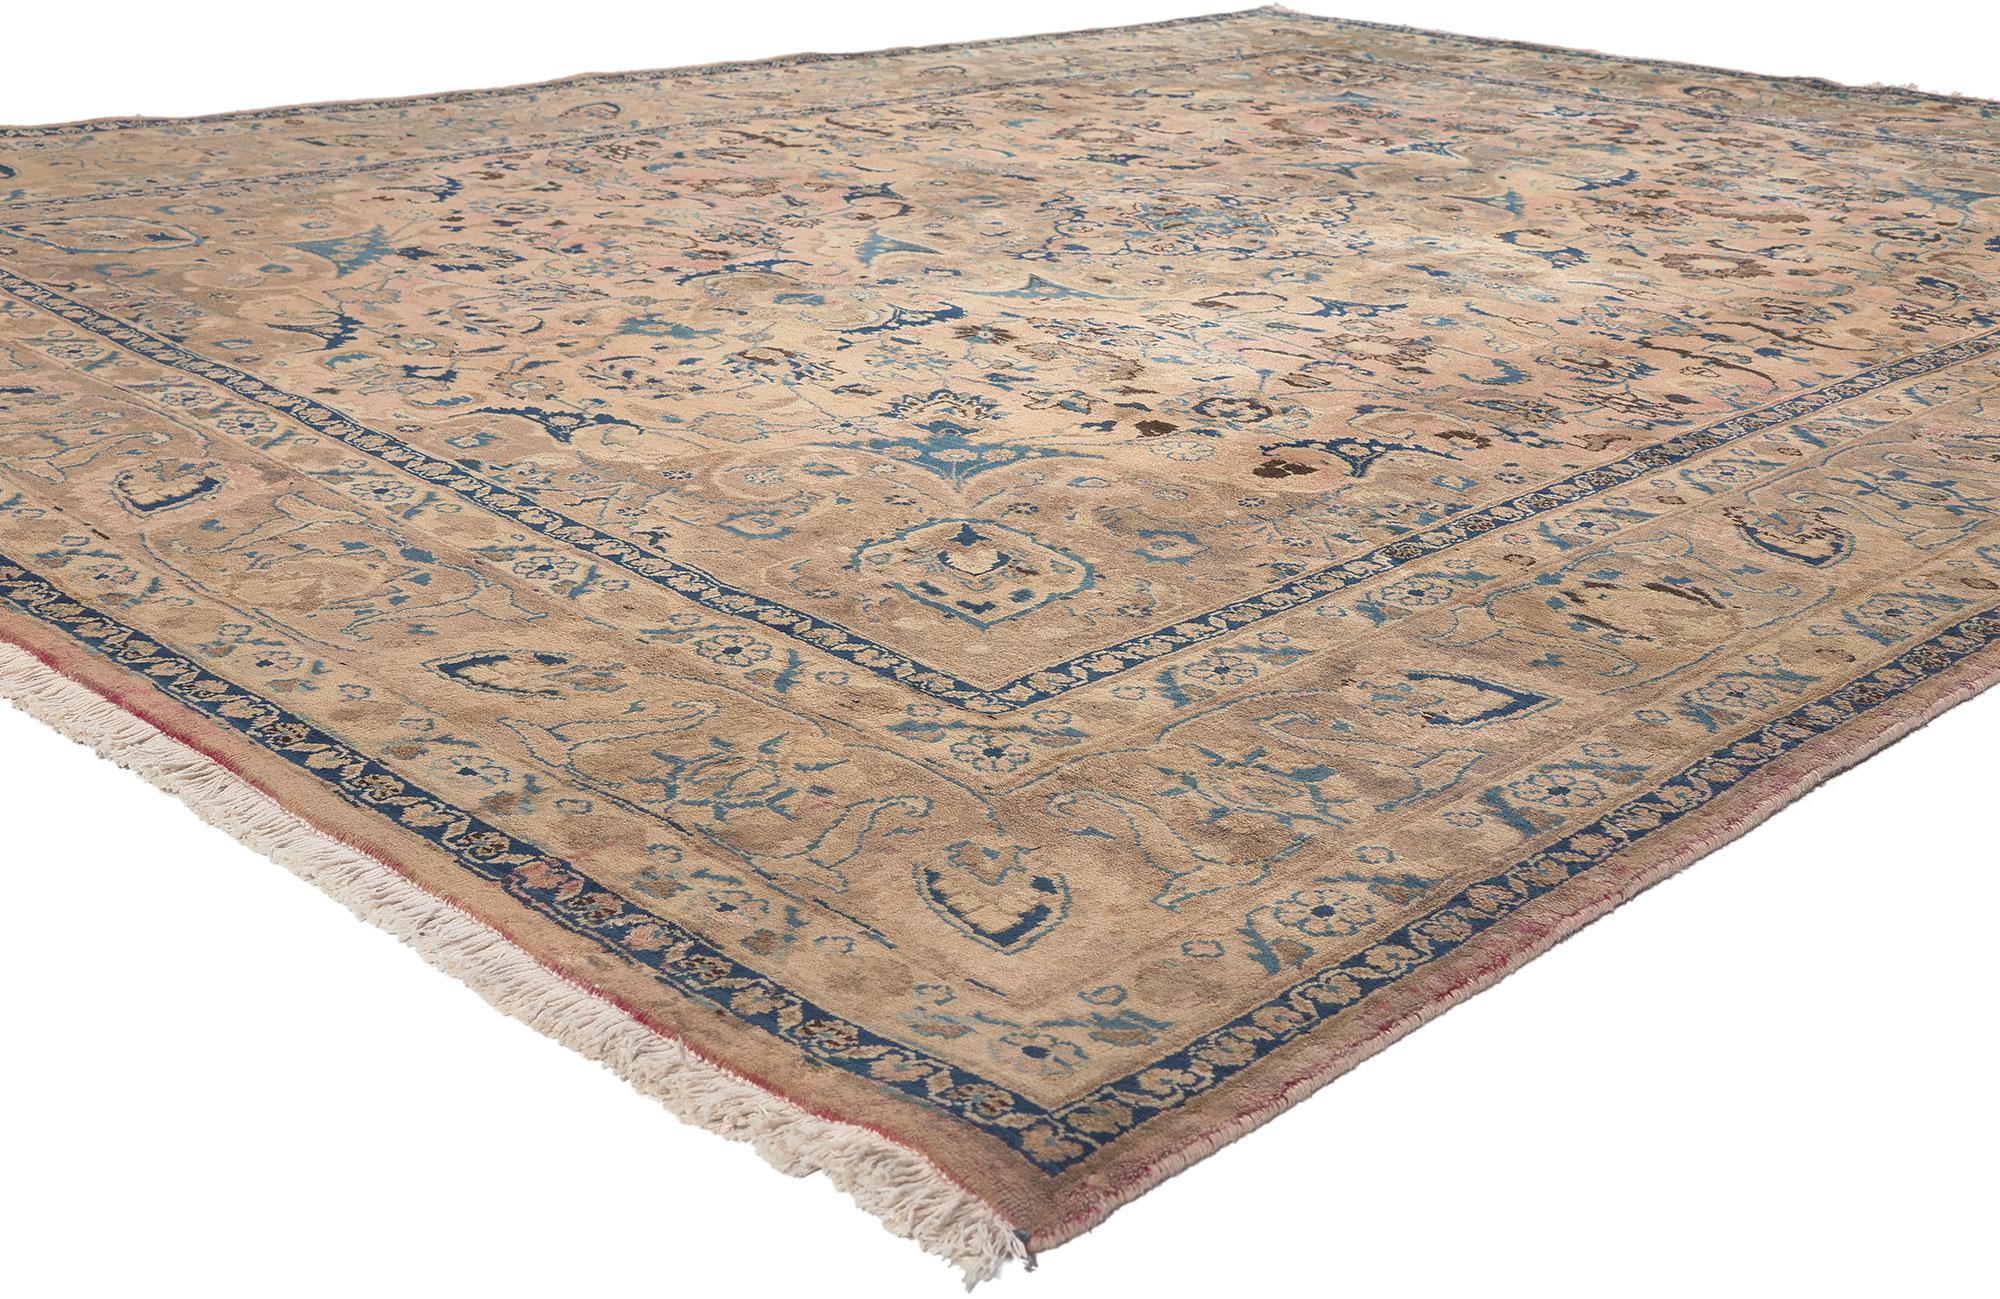 76462 Vintage Persian Khorassan Rug, 08'01 x 10'07.
Romantic Georgian style meets soft, bespoke Bridgerton vibes in this hand knotted wool vintage Persian Khorassan rug. Taking center stage is a cusped lozenge medallion anchored with a palmette